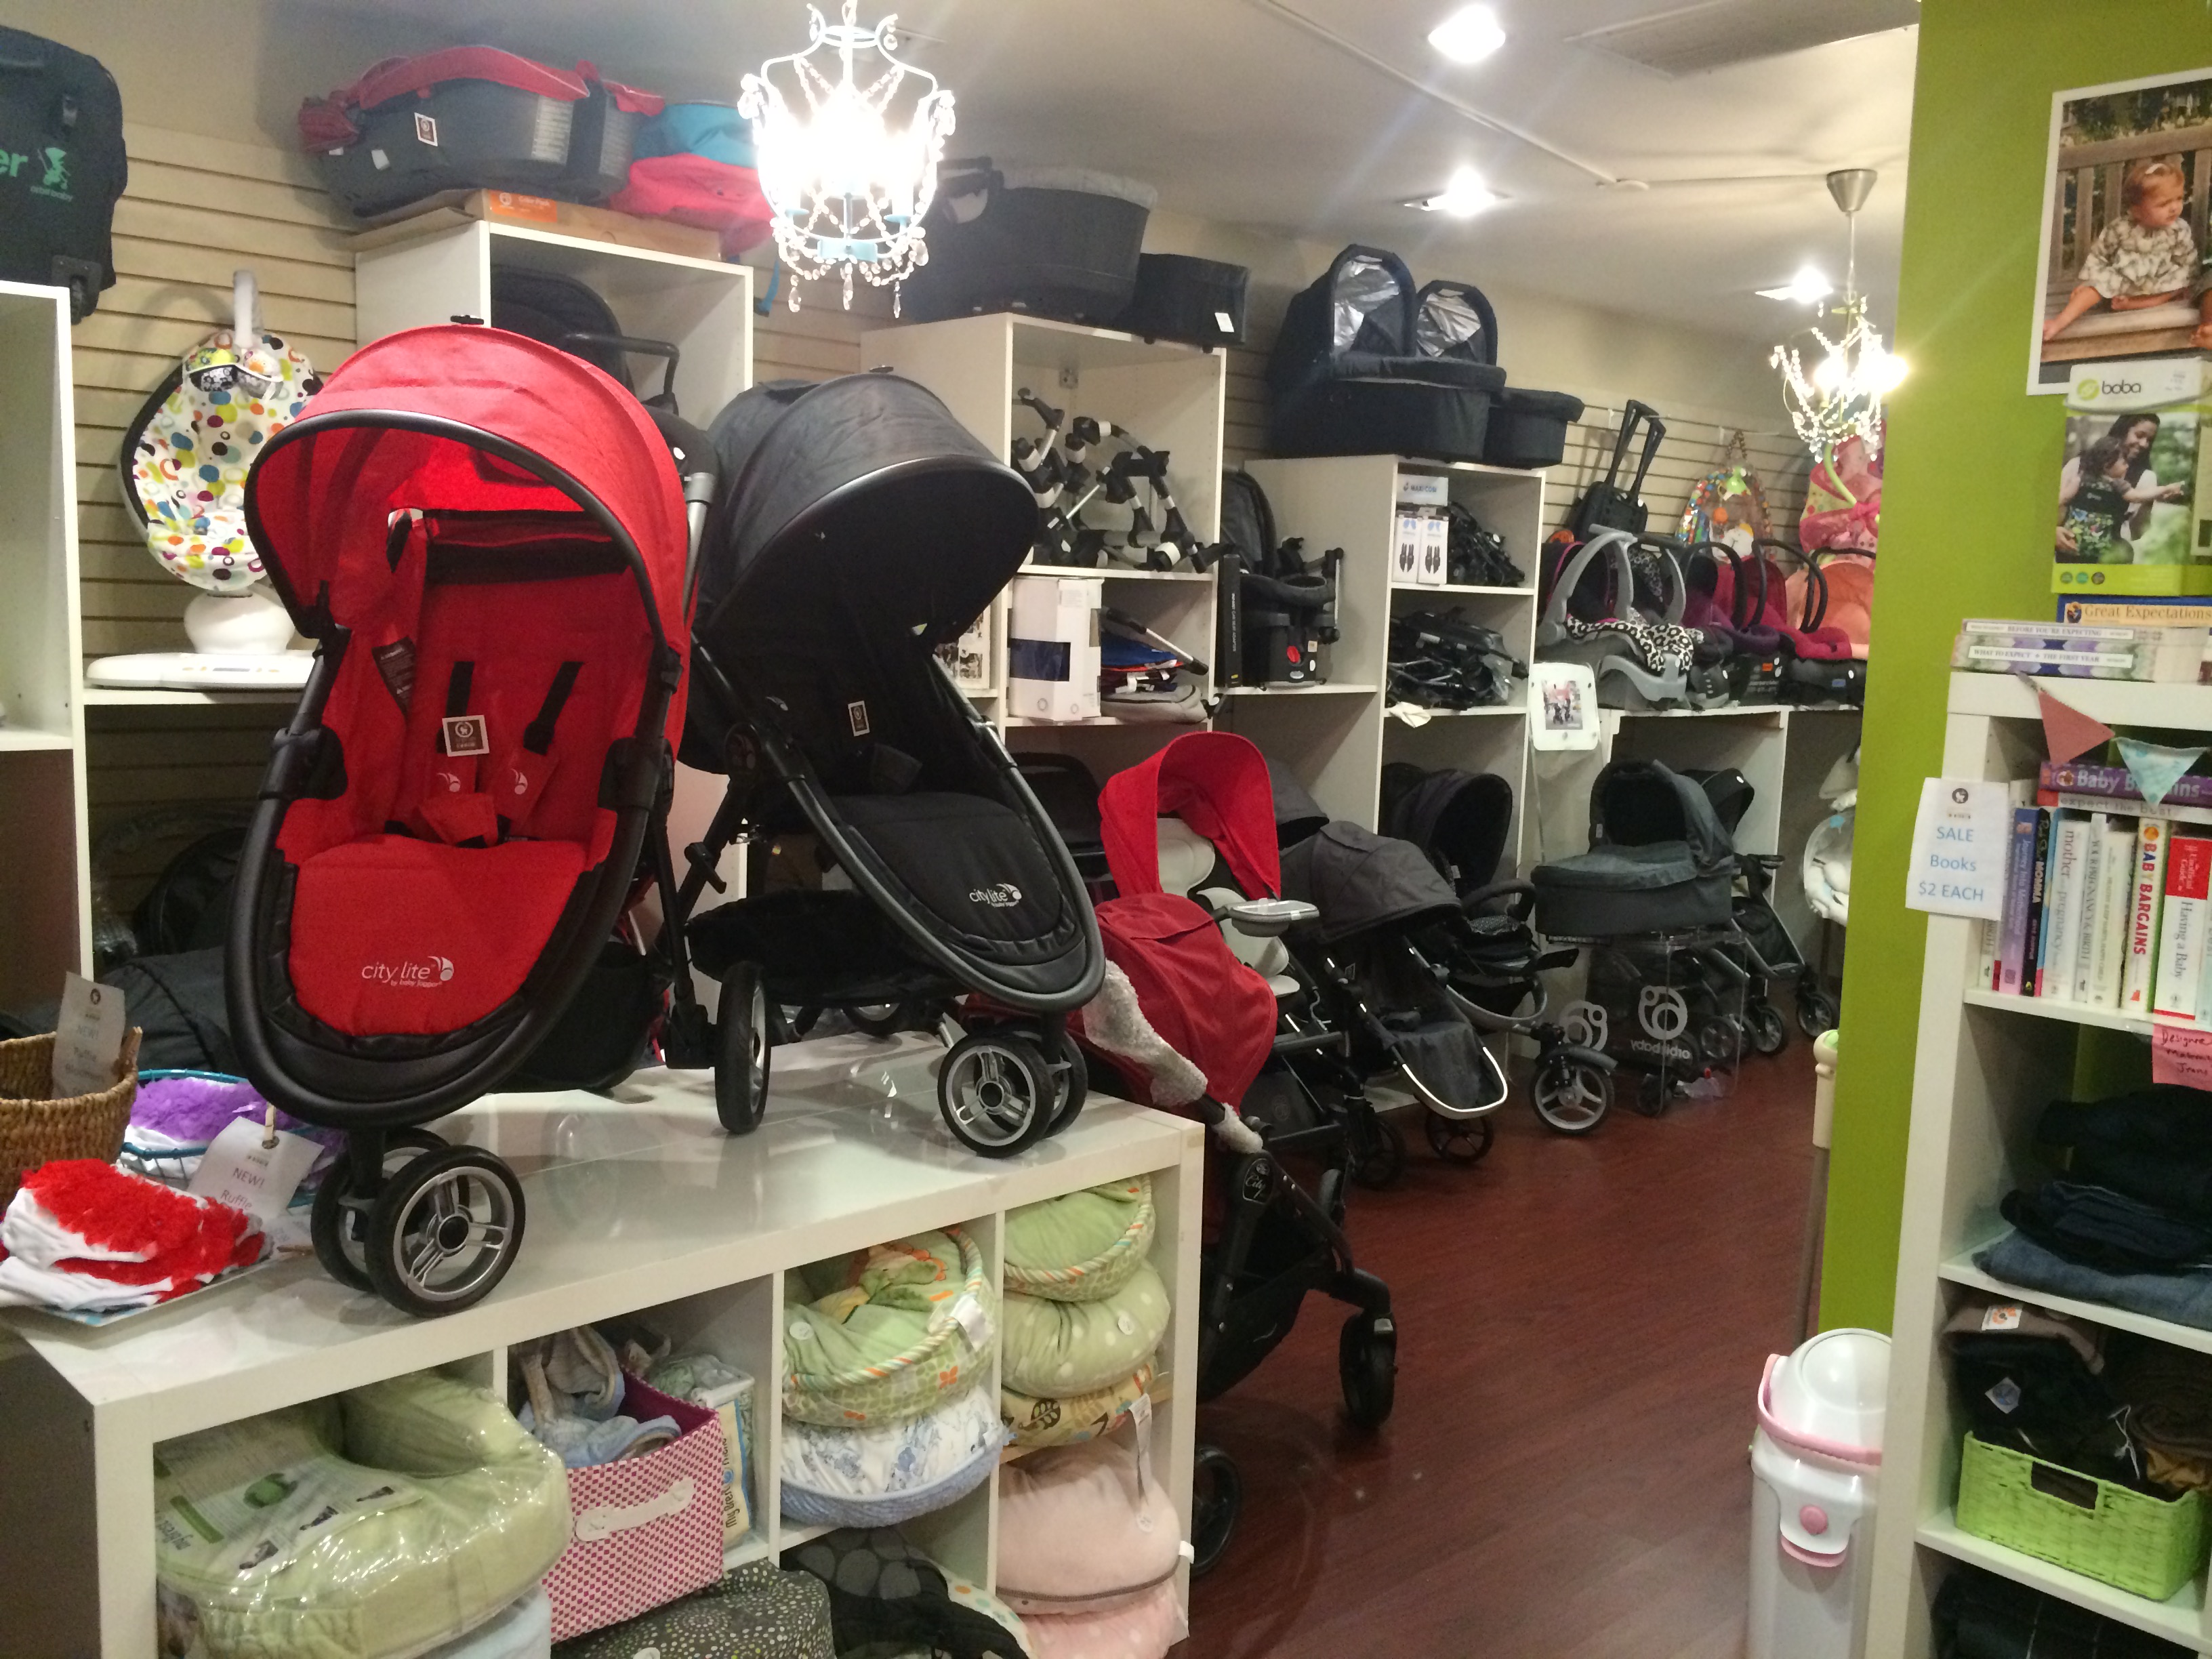 Best Stores In Orange County For Second-Hand Baby Gear – CBS Los Angeles